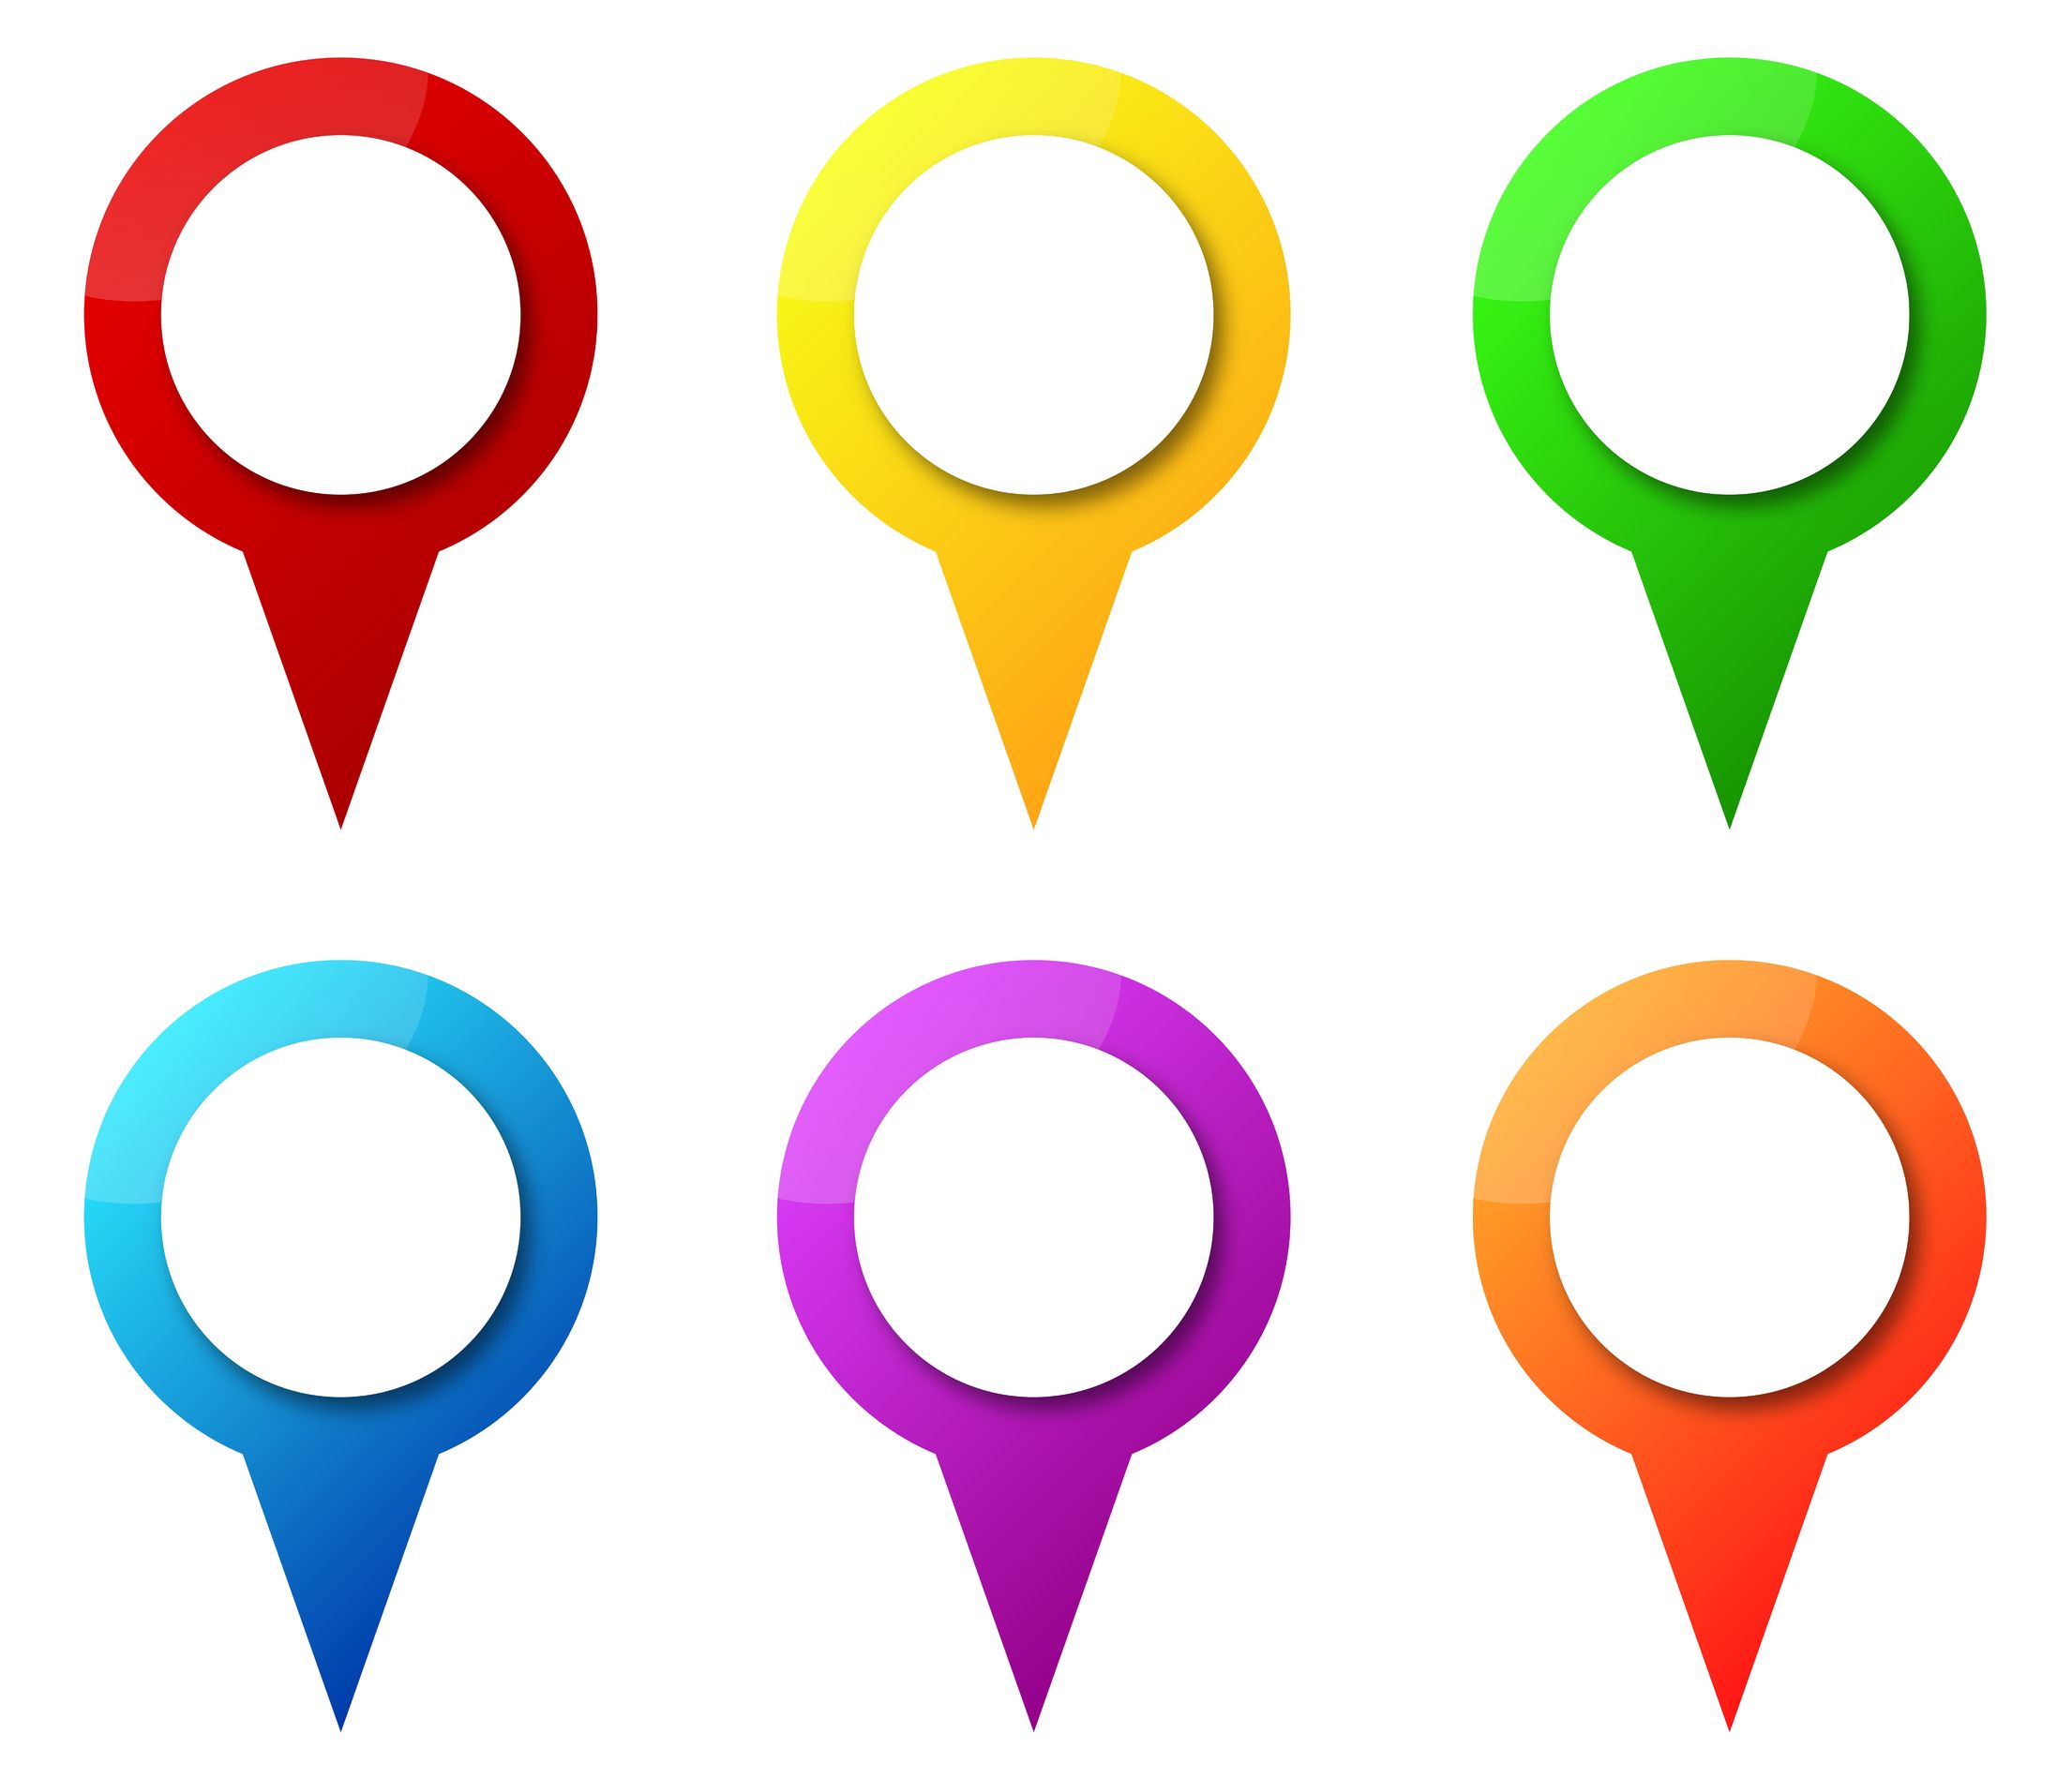 18625271 - illustration of colorful map pointers with blank circle tag